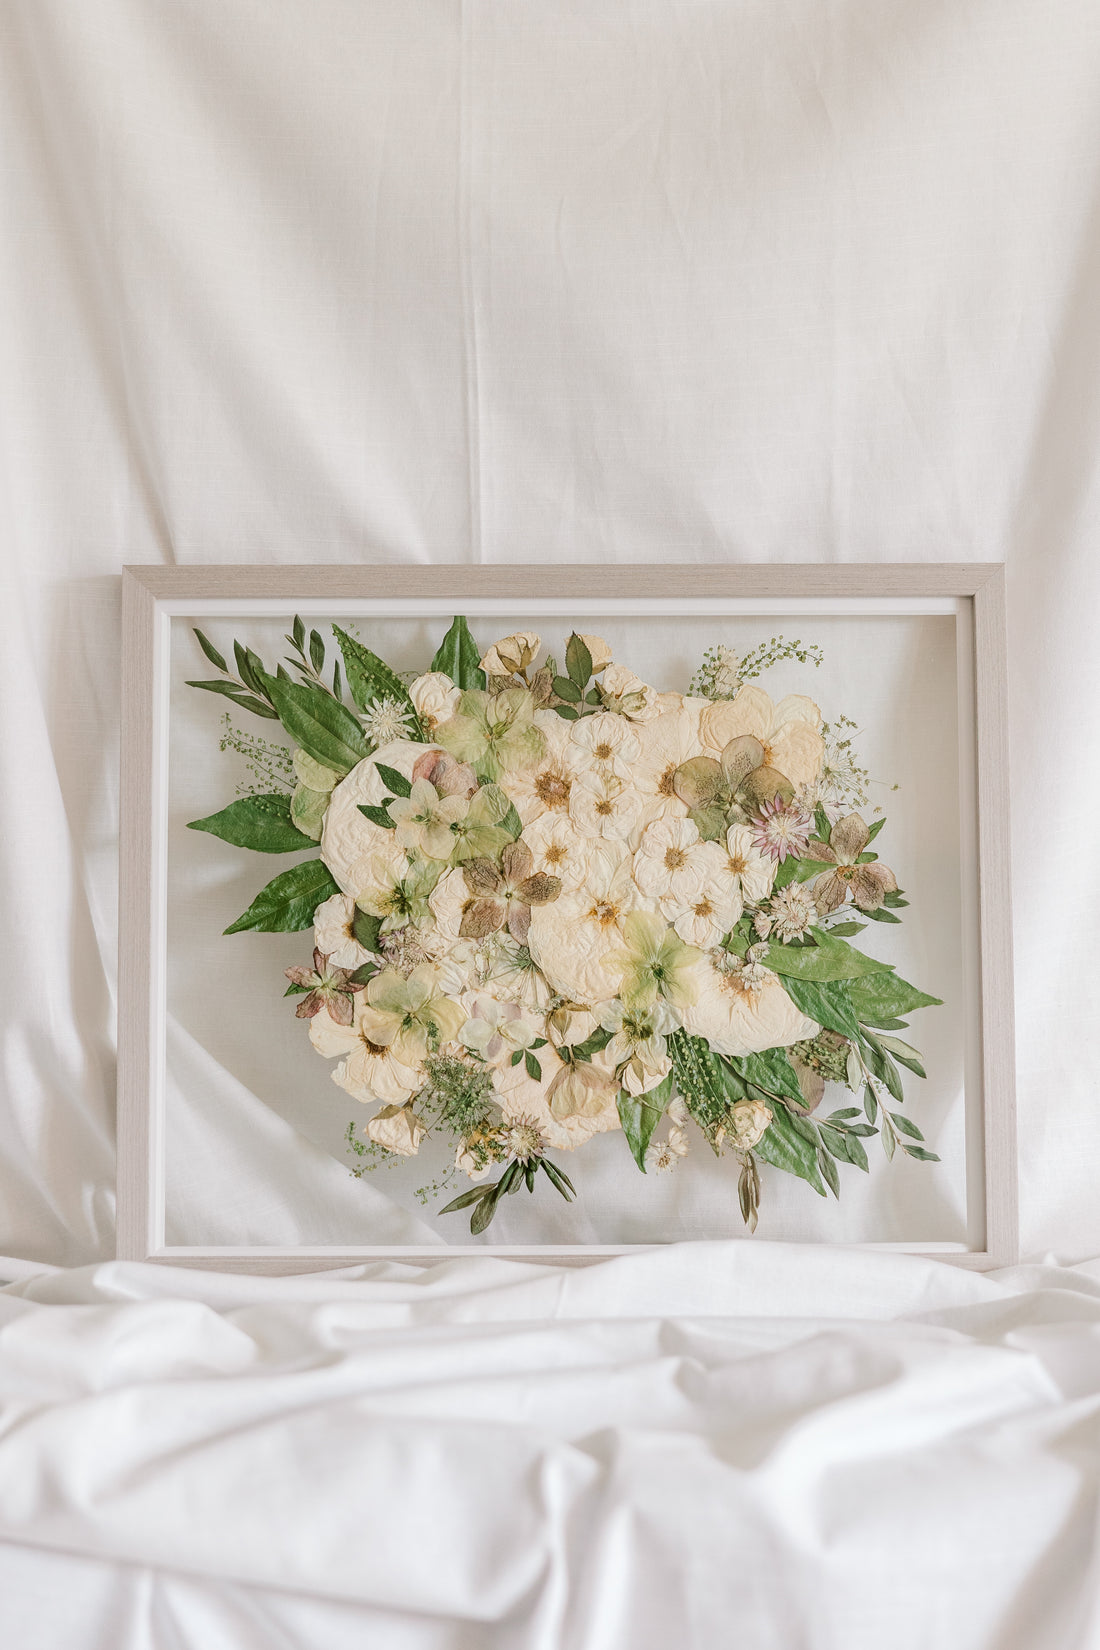 A white and green pressed wedding bouquet on display in a glass floating frame surrounded by gray wood.